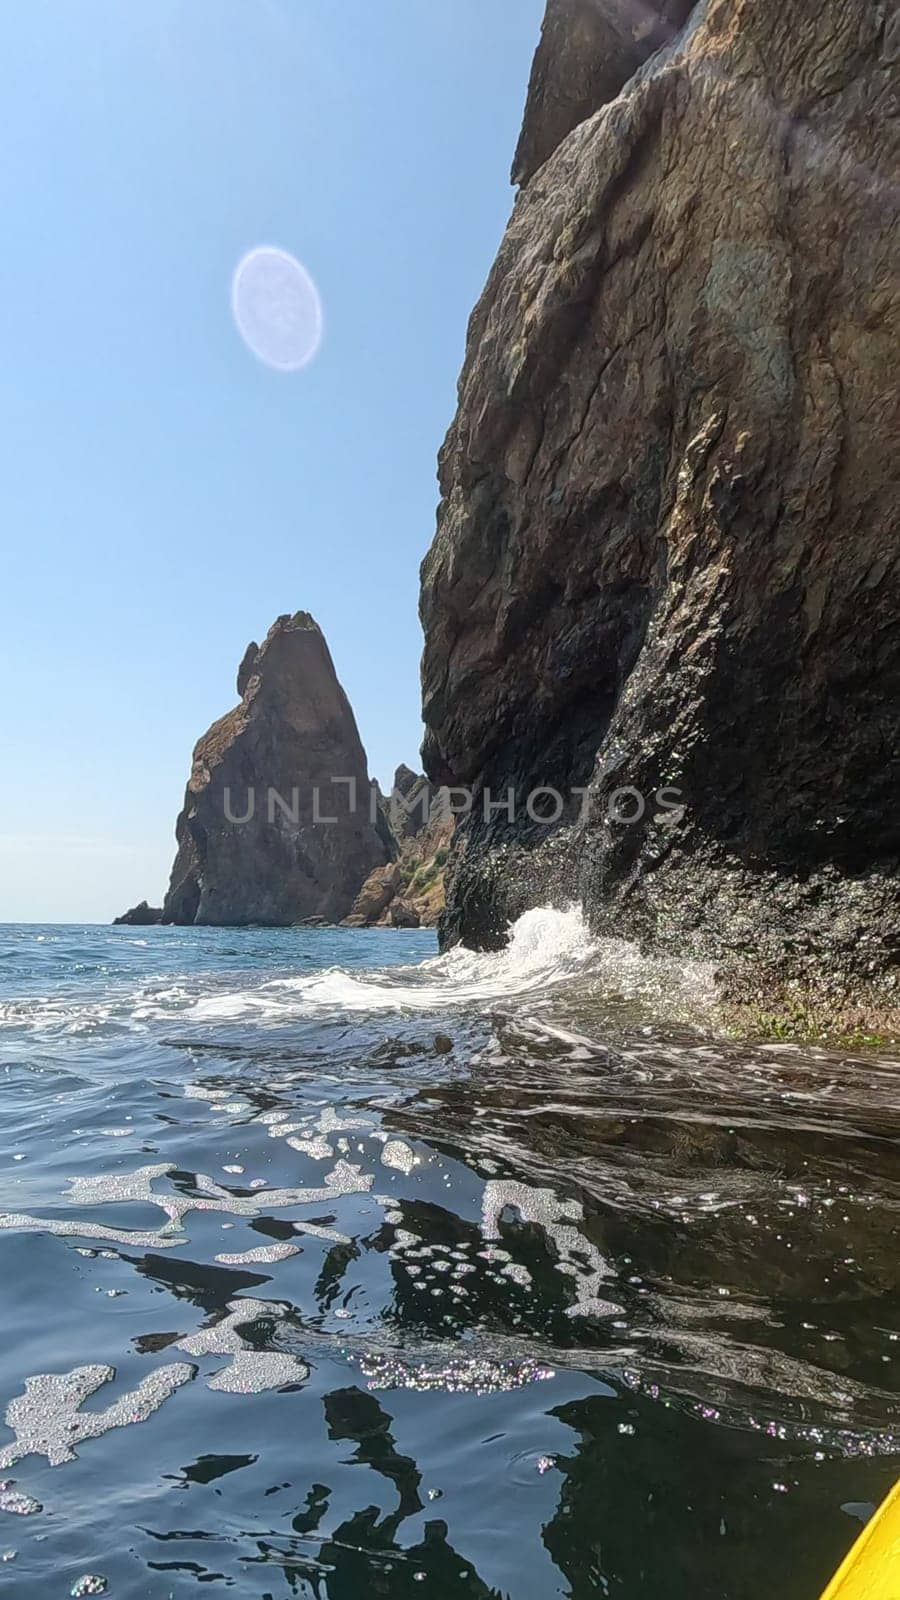 Sea kayak rocks waves. Kayaking in the sea on a sunny day along the coast and rocks. vertical video